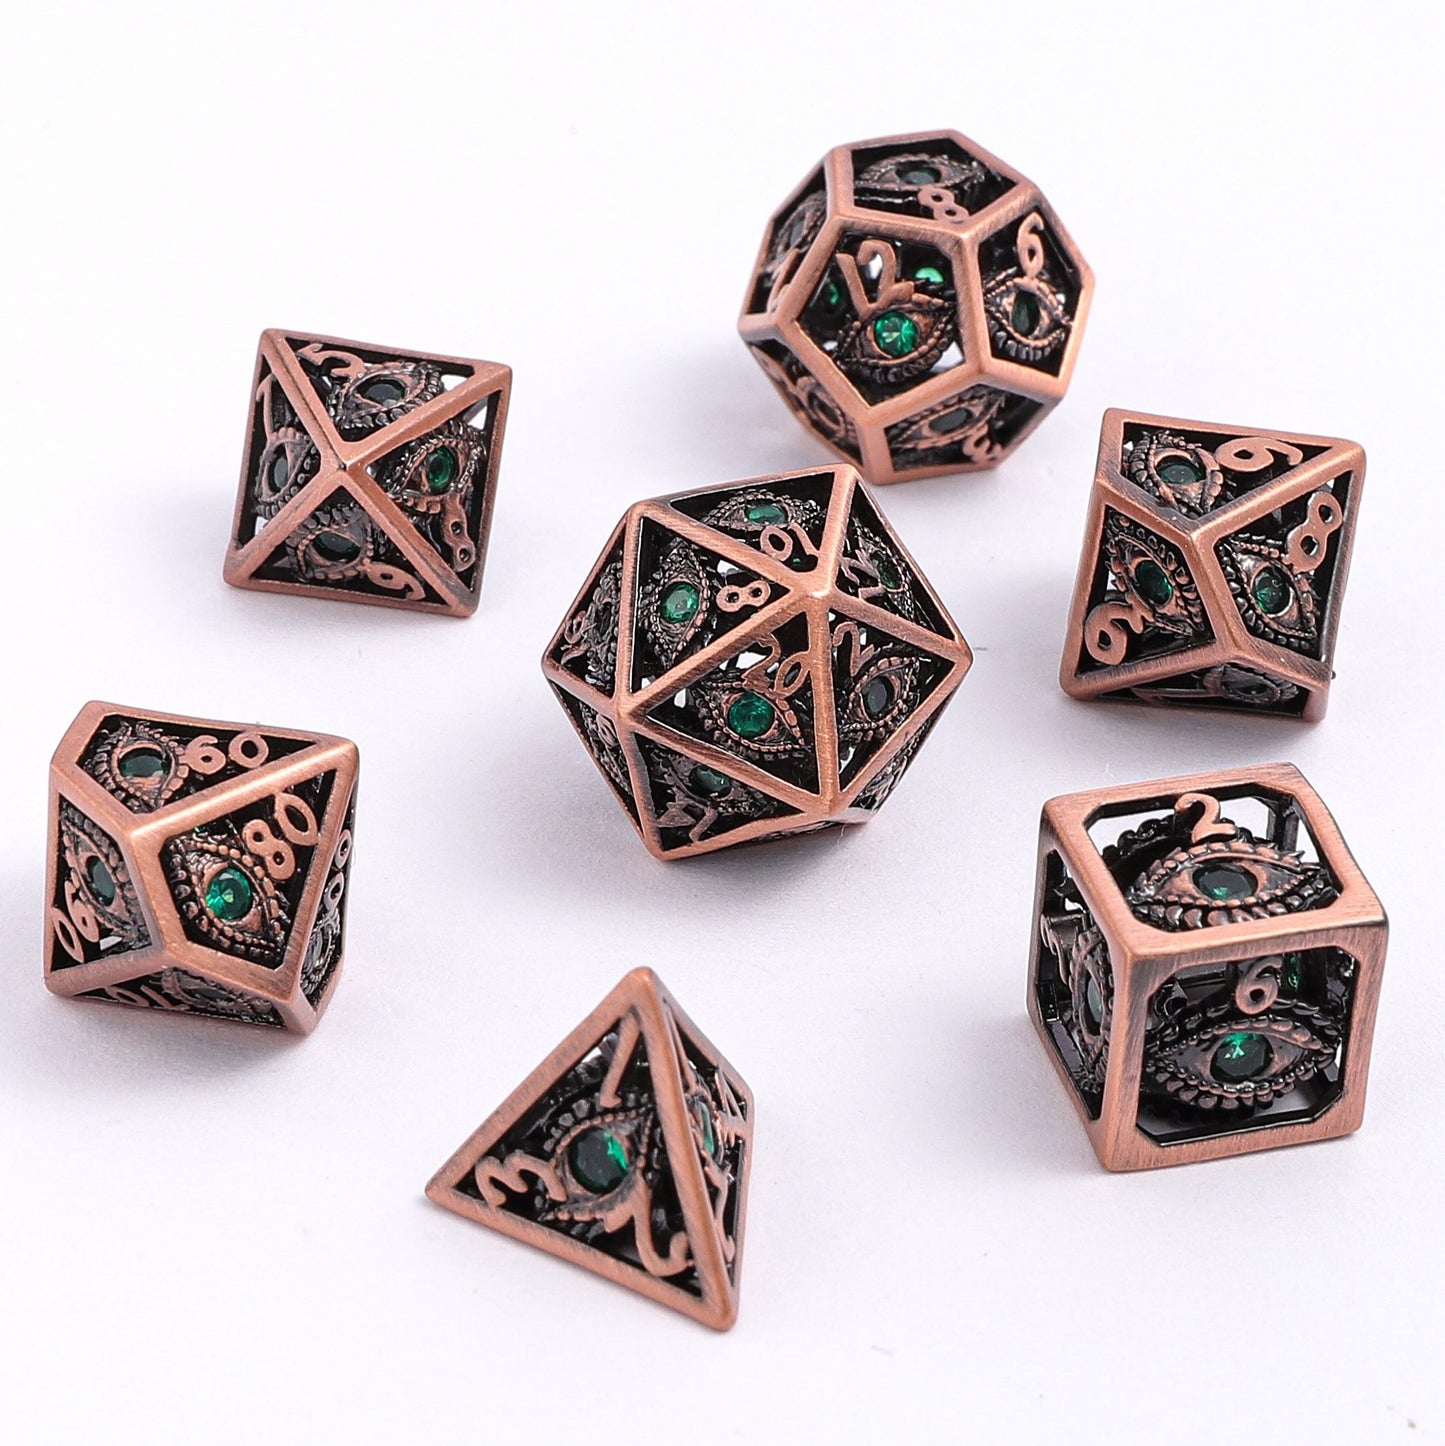 Hollow 10mm mini Dragon's Eye dice set-Ancient Copper with Green Gems